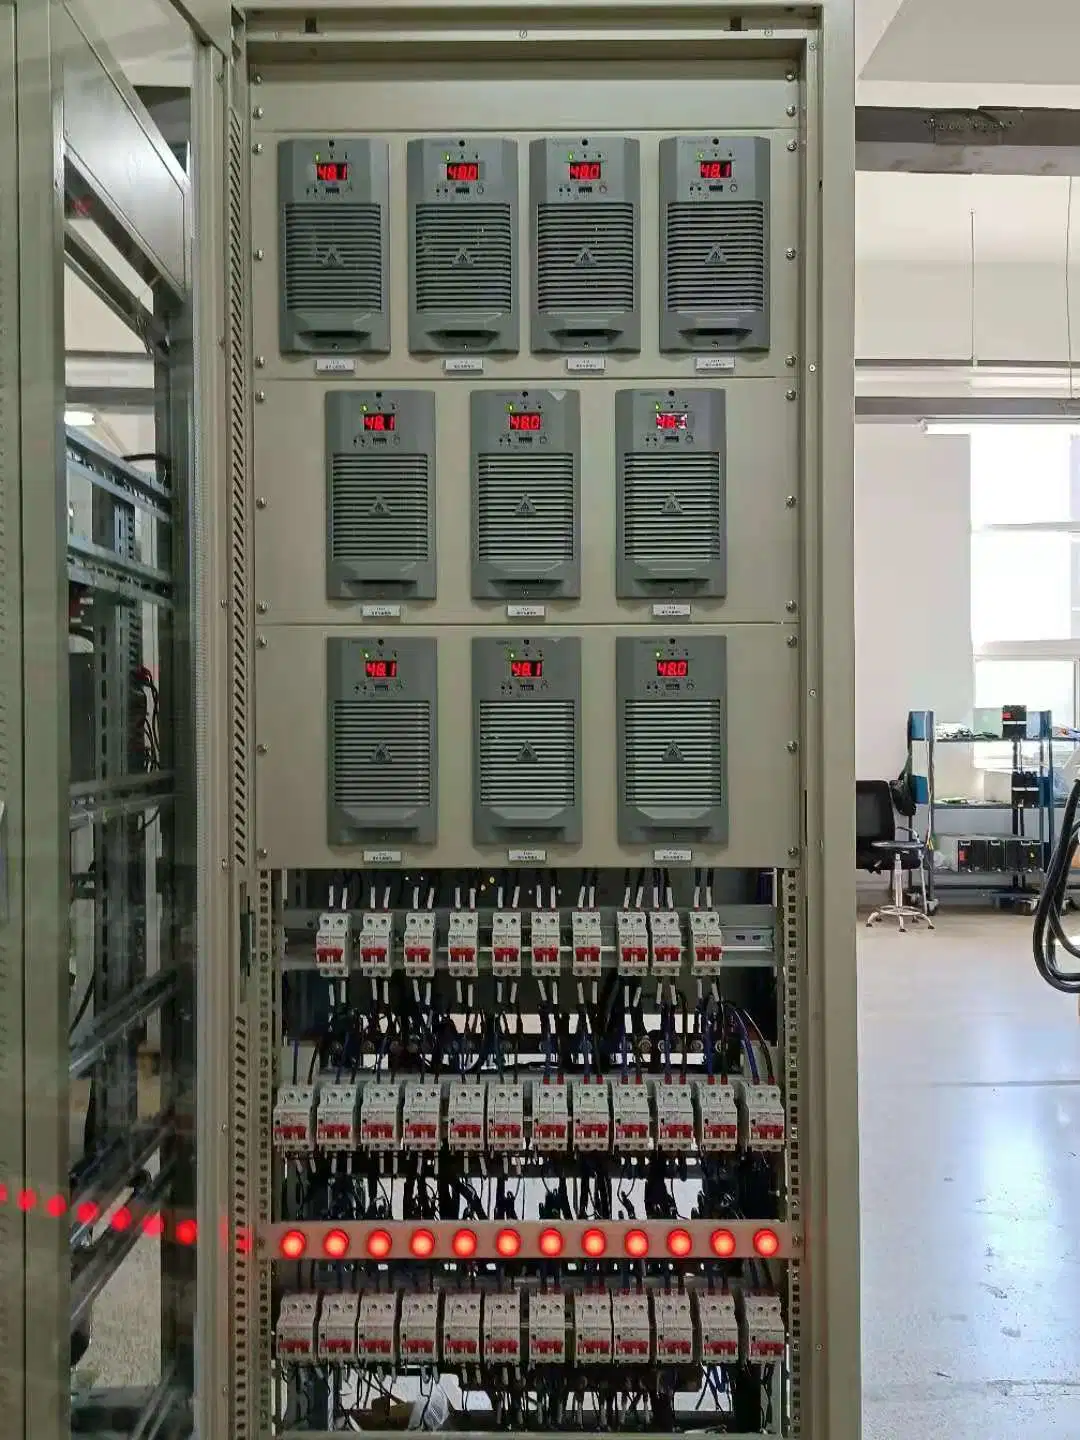 DC System / Rectifier System / Charging System / 220VDC System / 110VDC System / 150ah Battery System / Charging Cabinet / Rectifier Cabinet